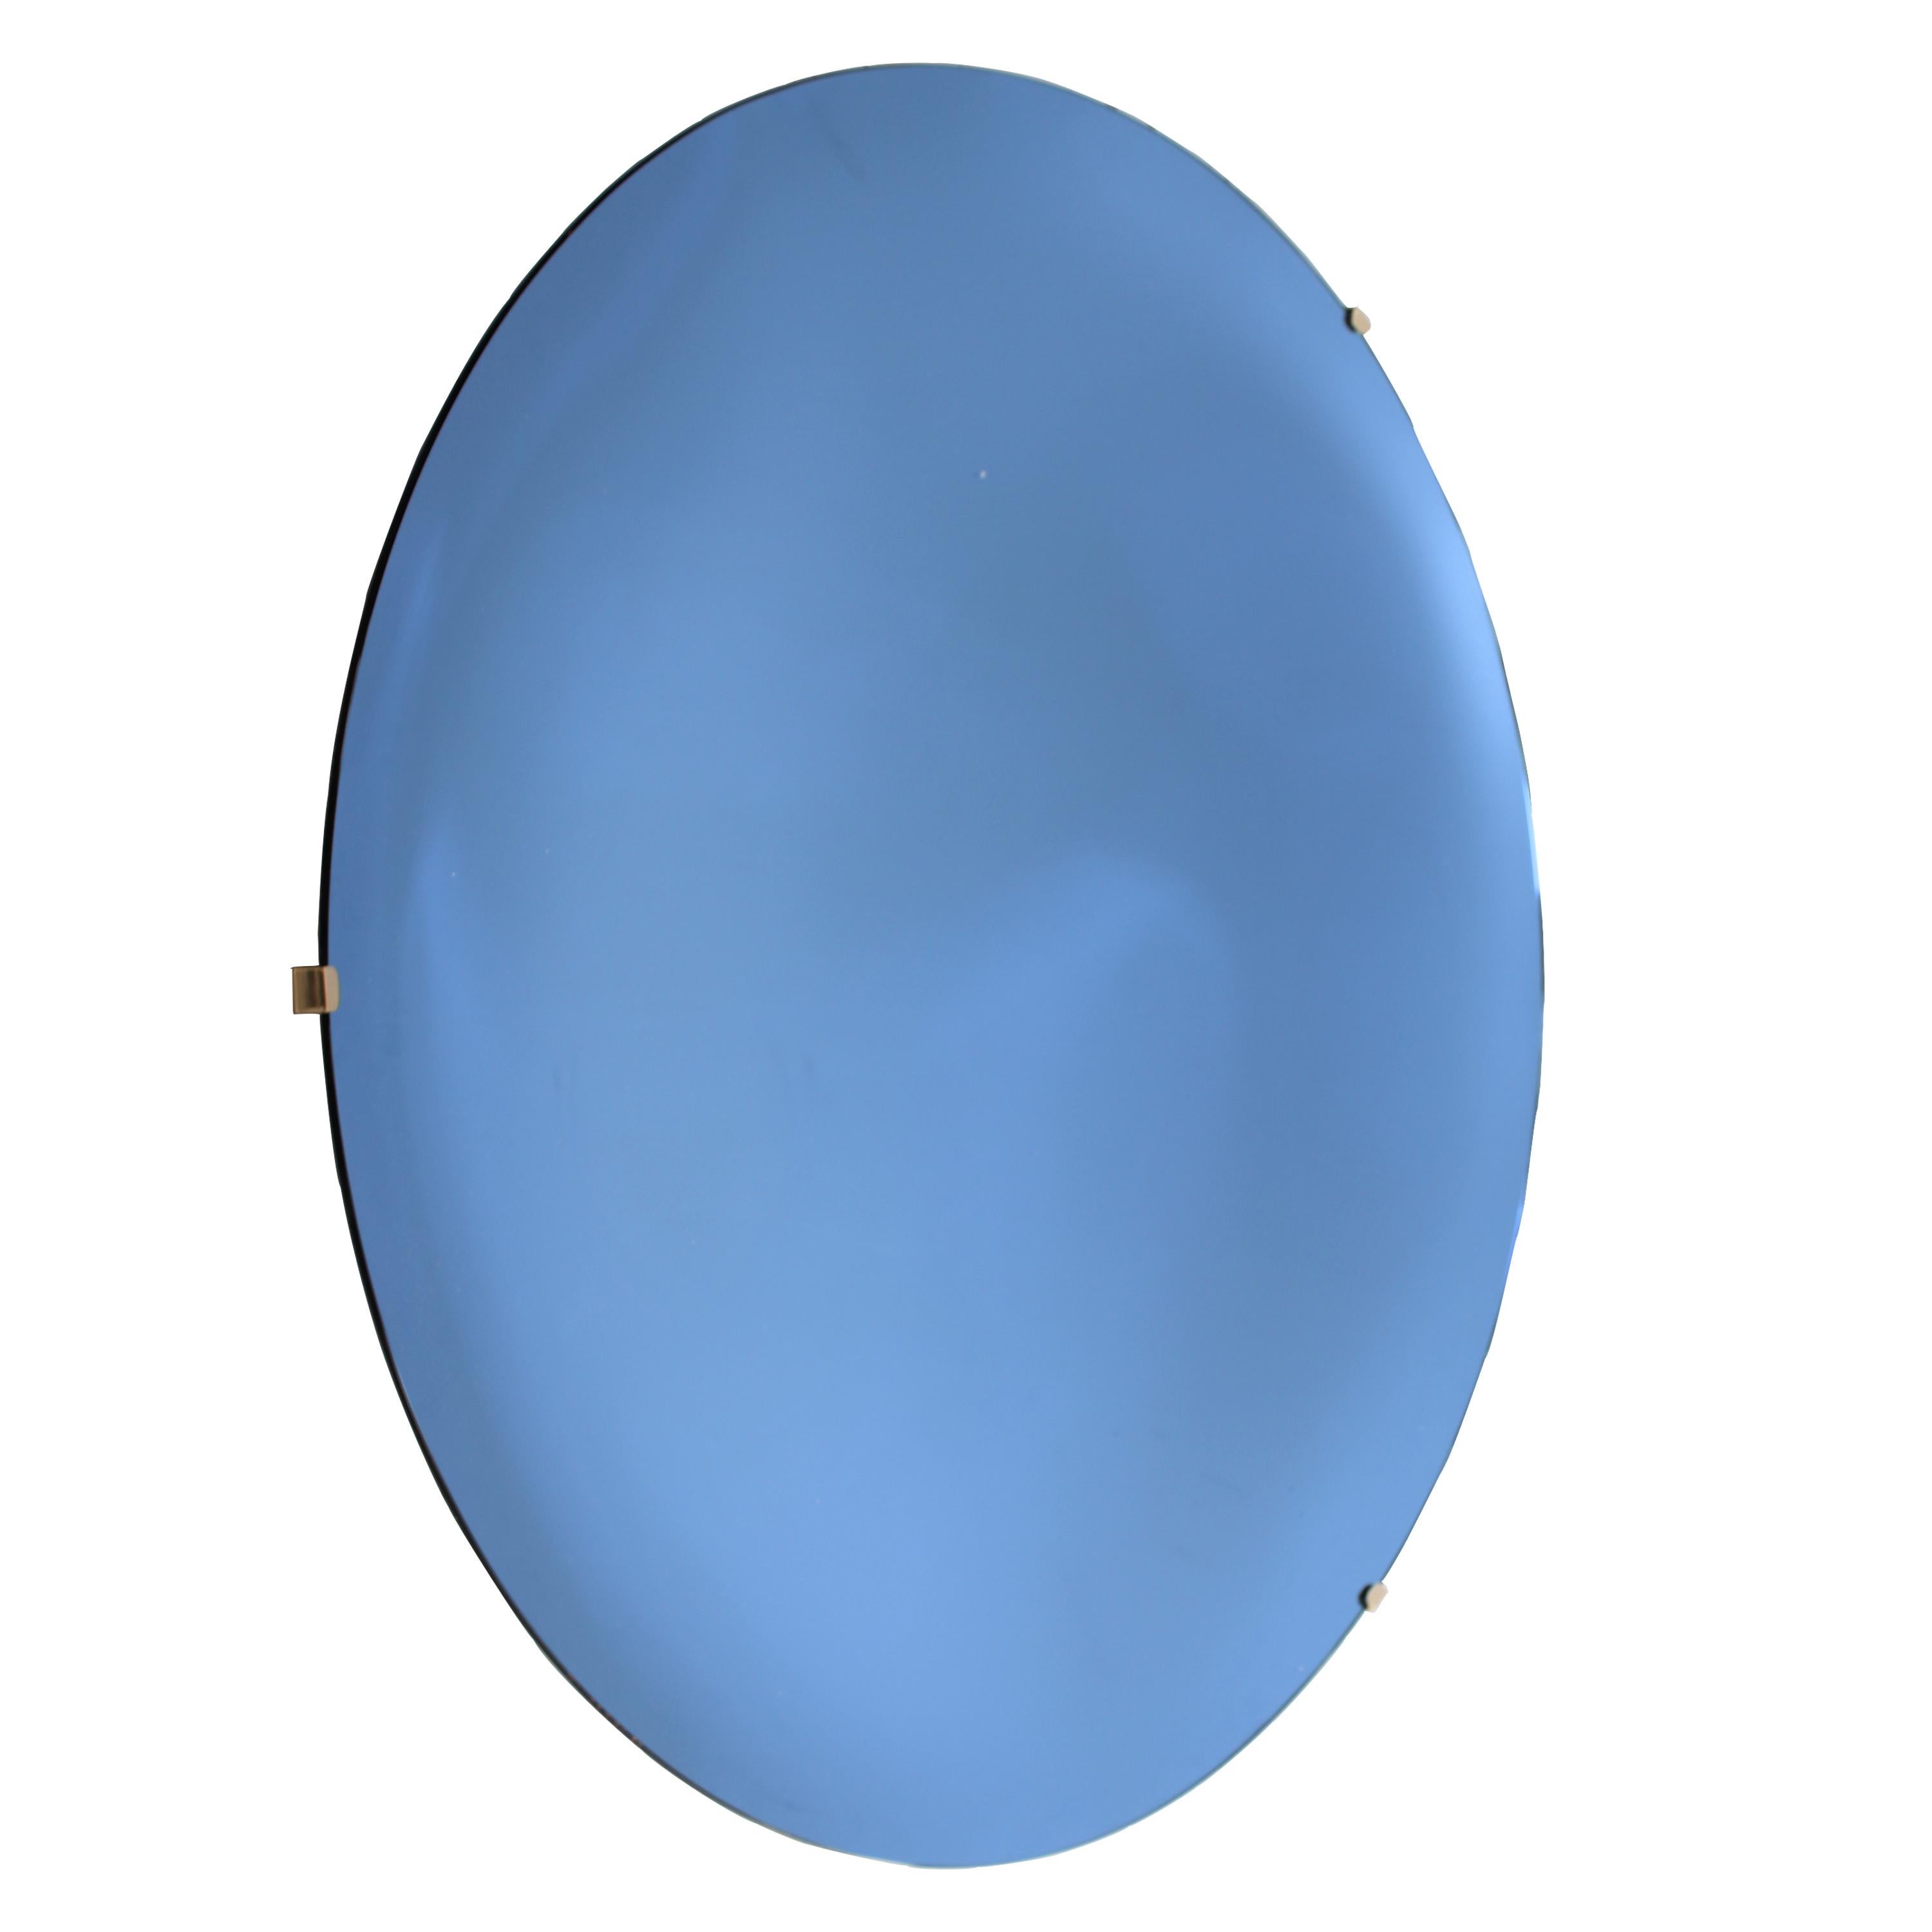 Hand-crafted blue Murano glass concave mirror in a unique size of 130 diameter, with bevel edge and brass back structure for hanging on the wall.